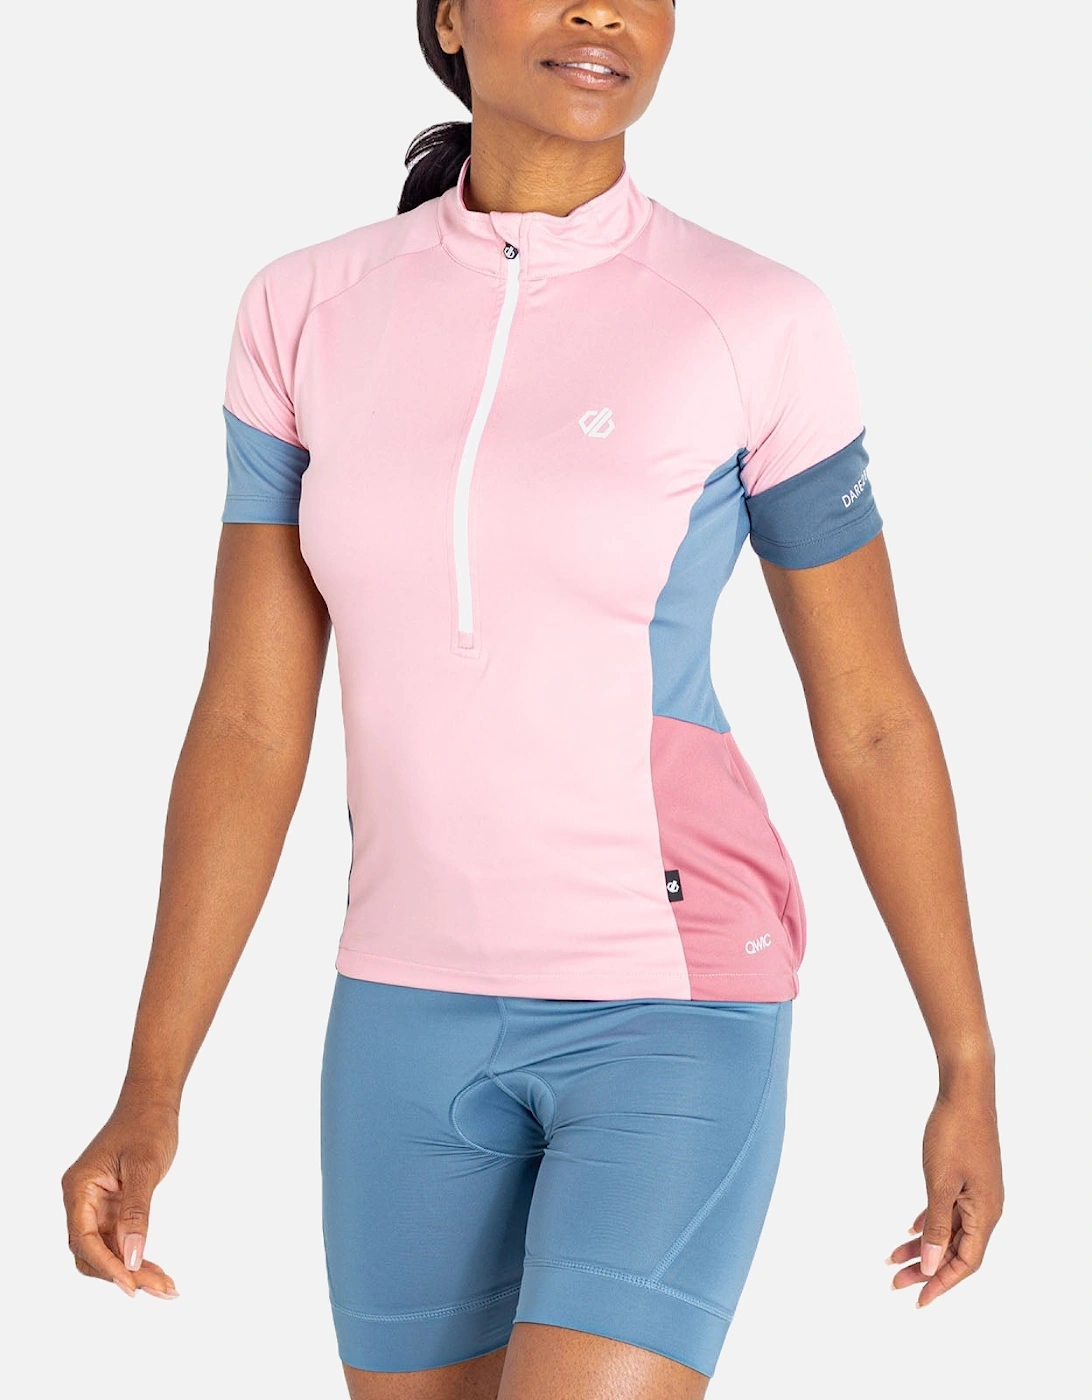 Womens Compassion II Cycling Jersey